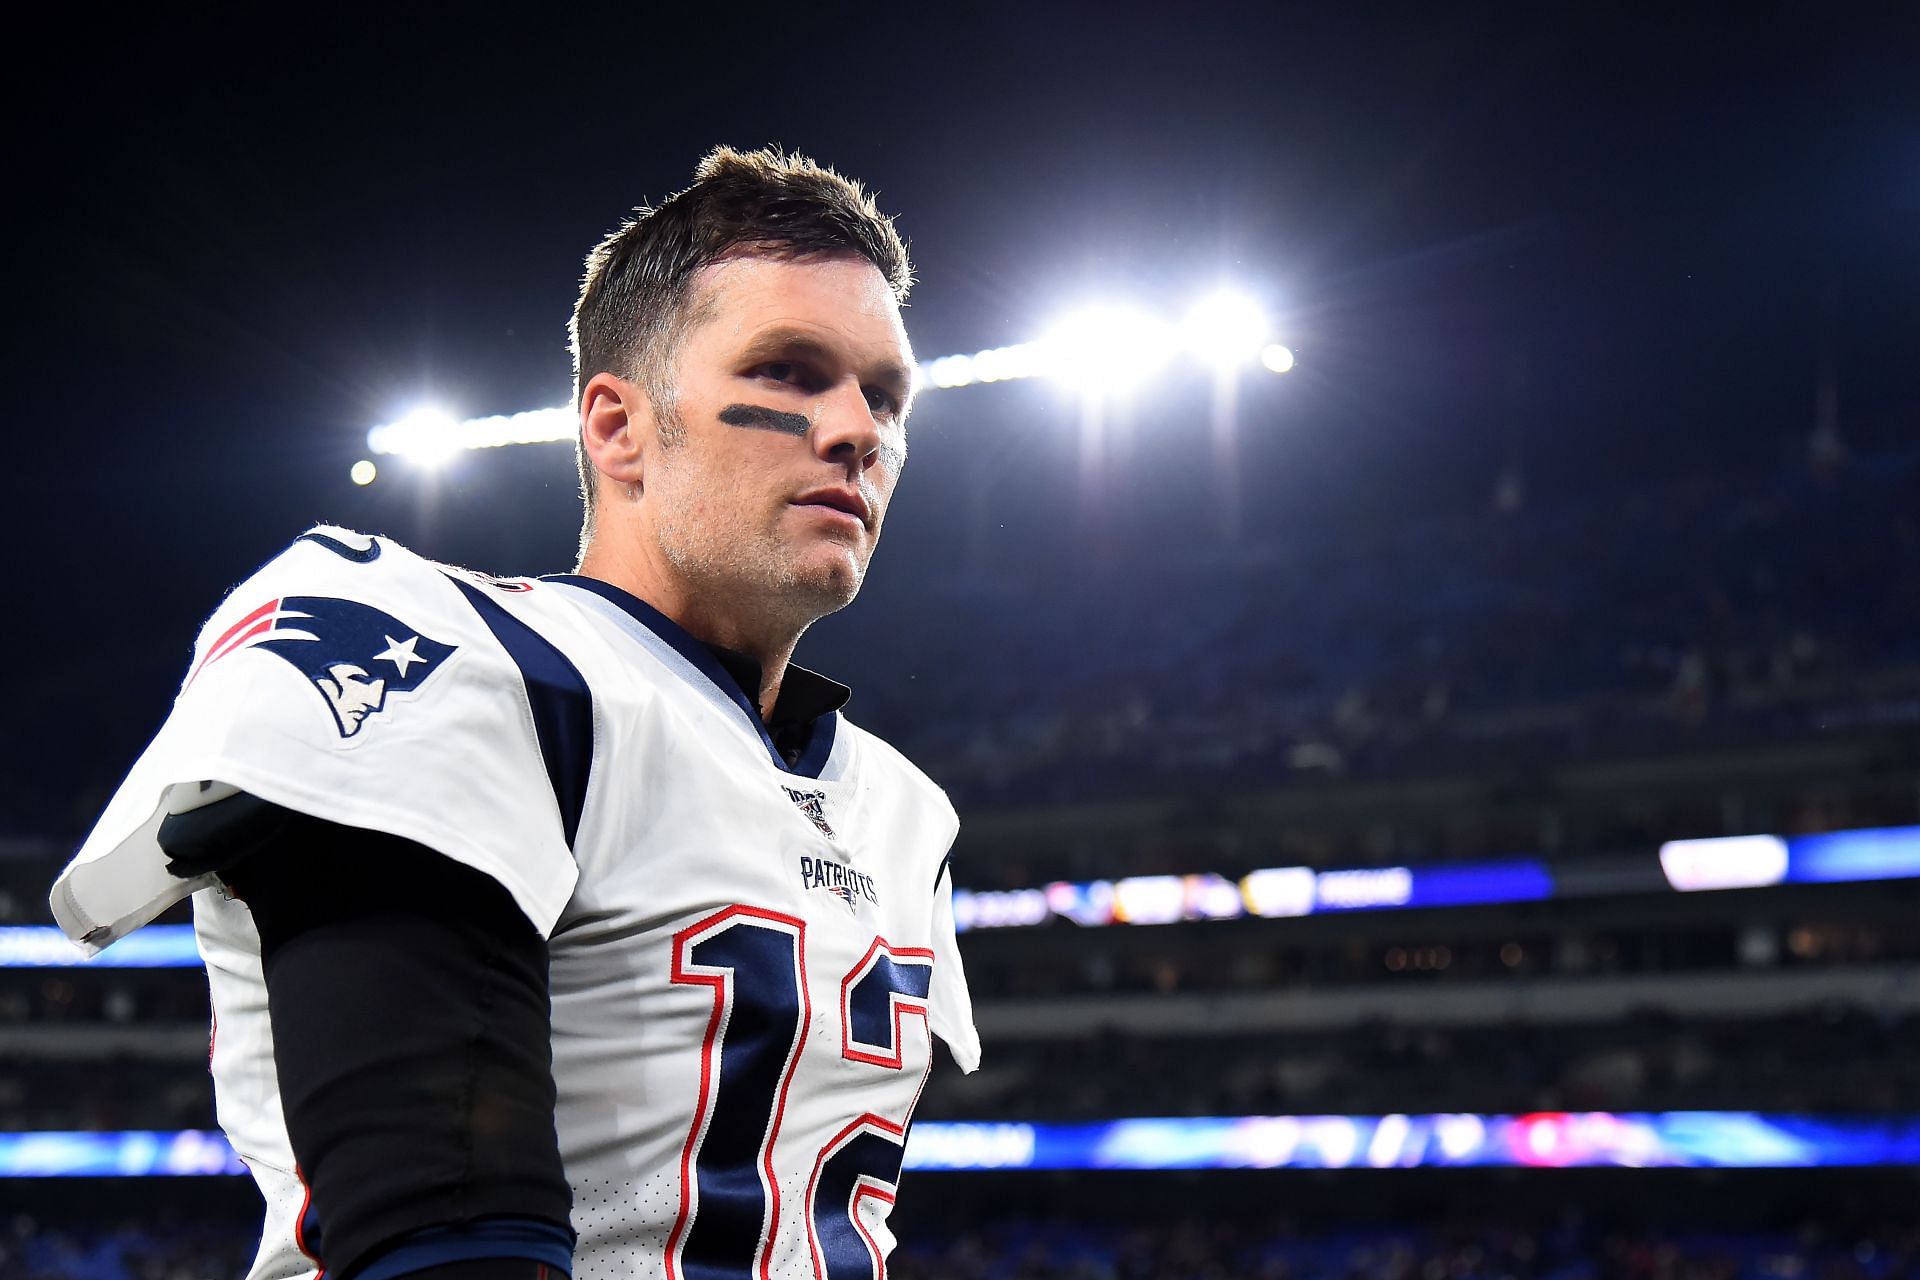 How many uniform numbers are retired by the New England Patriots?